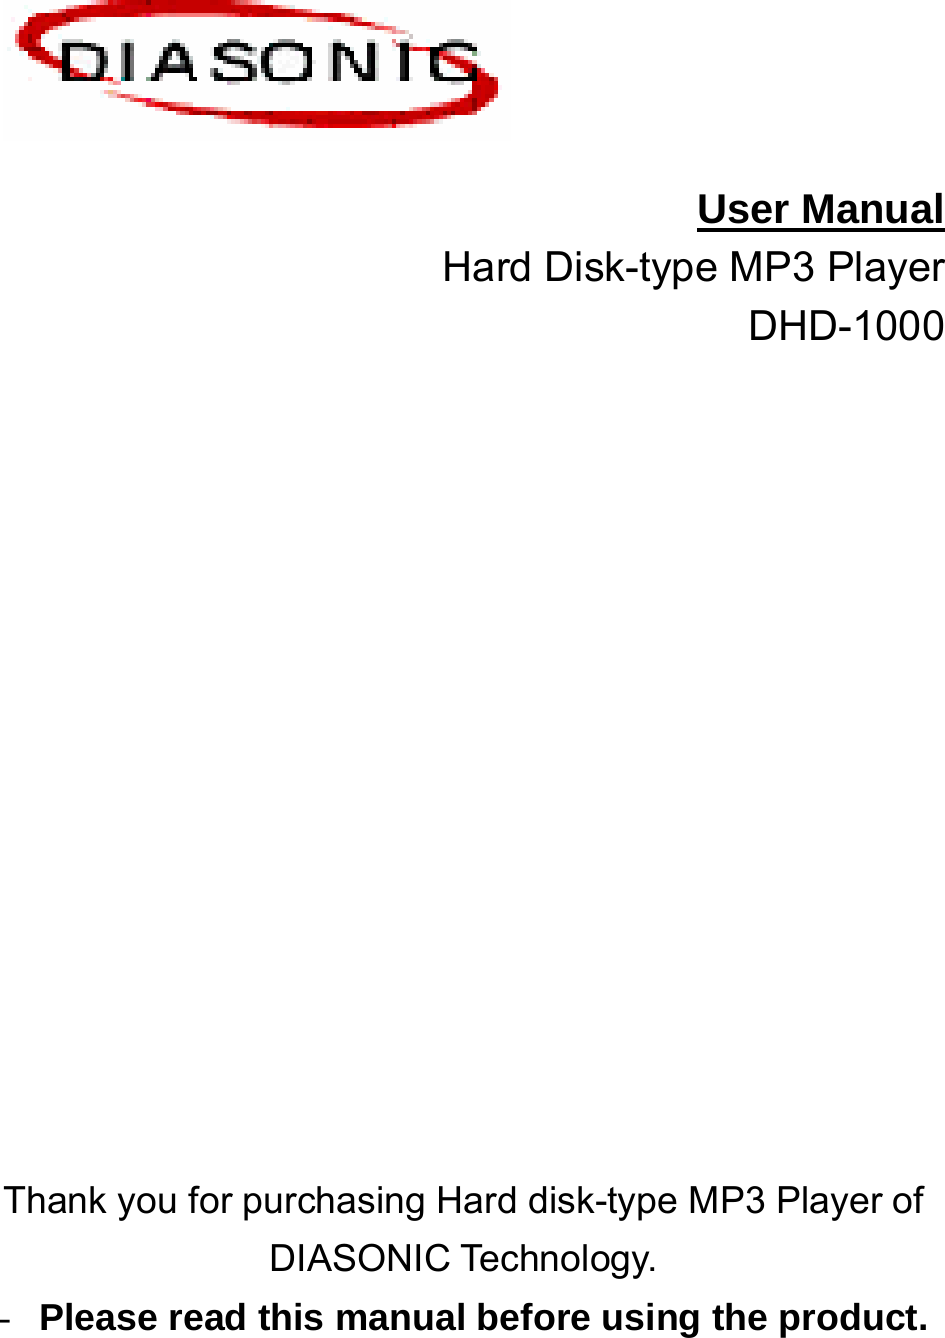   User Manual Hard Disk-type MP3 Player                                 DHD-1000                             Thank you for purchasing Hard disk-type MP3 Player of DIASONIC Technology.   - Please read this manual before using the product.  